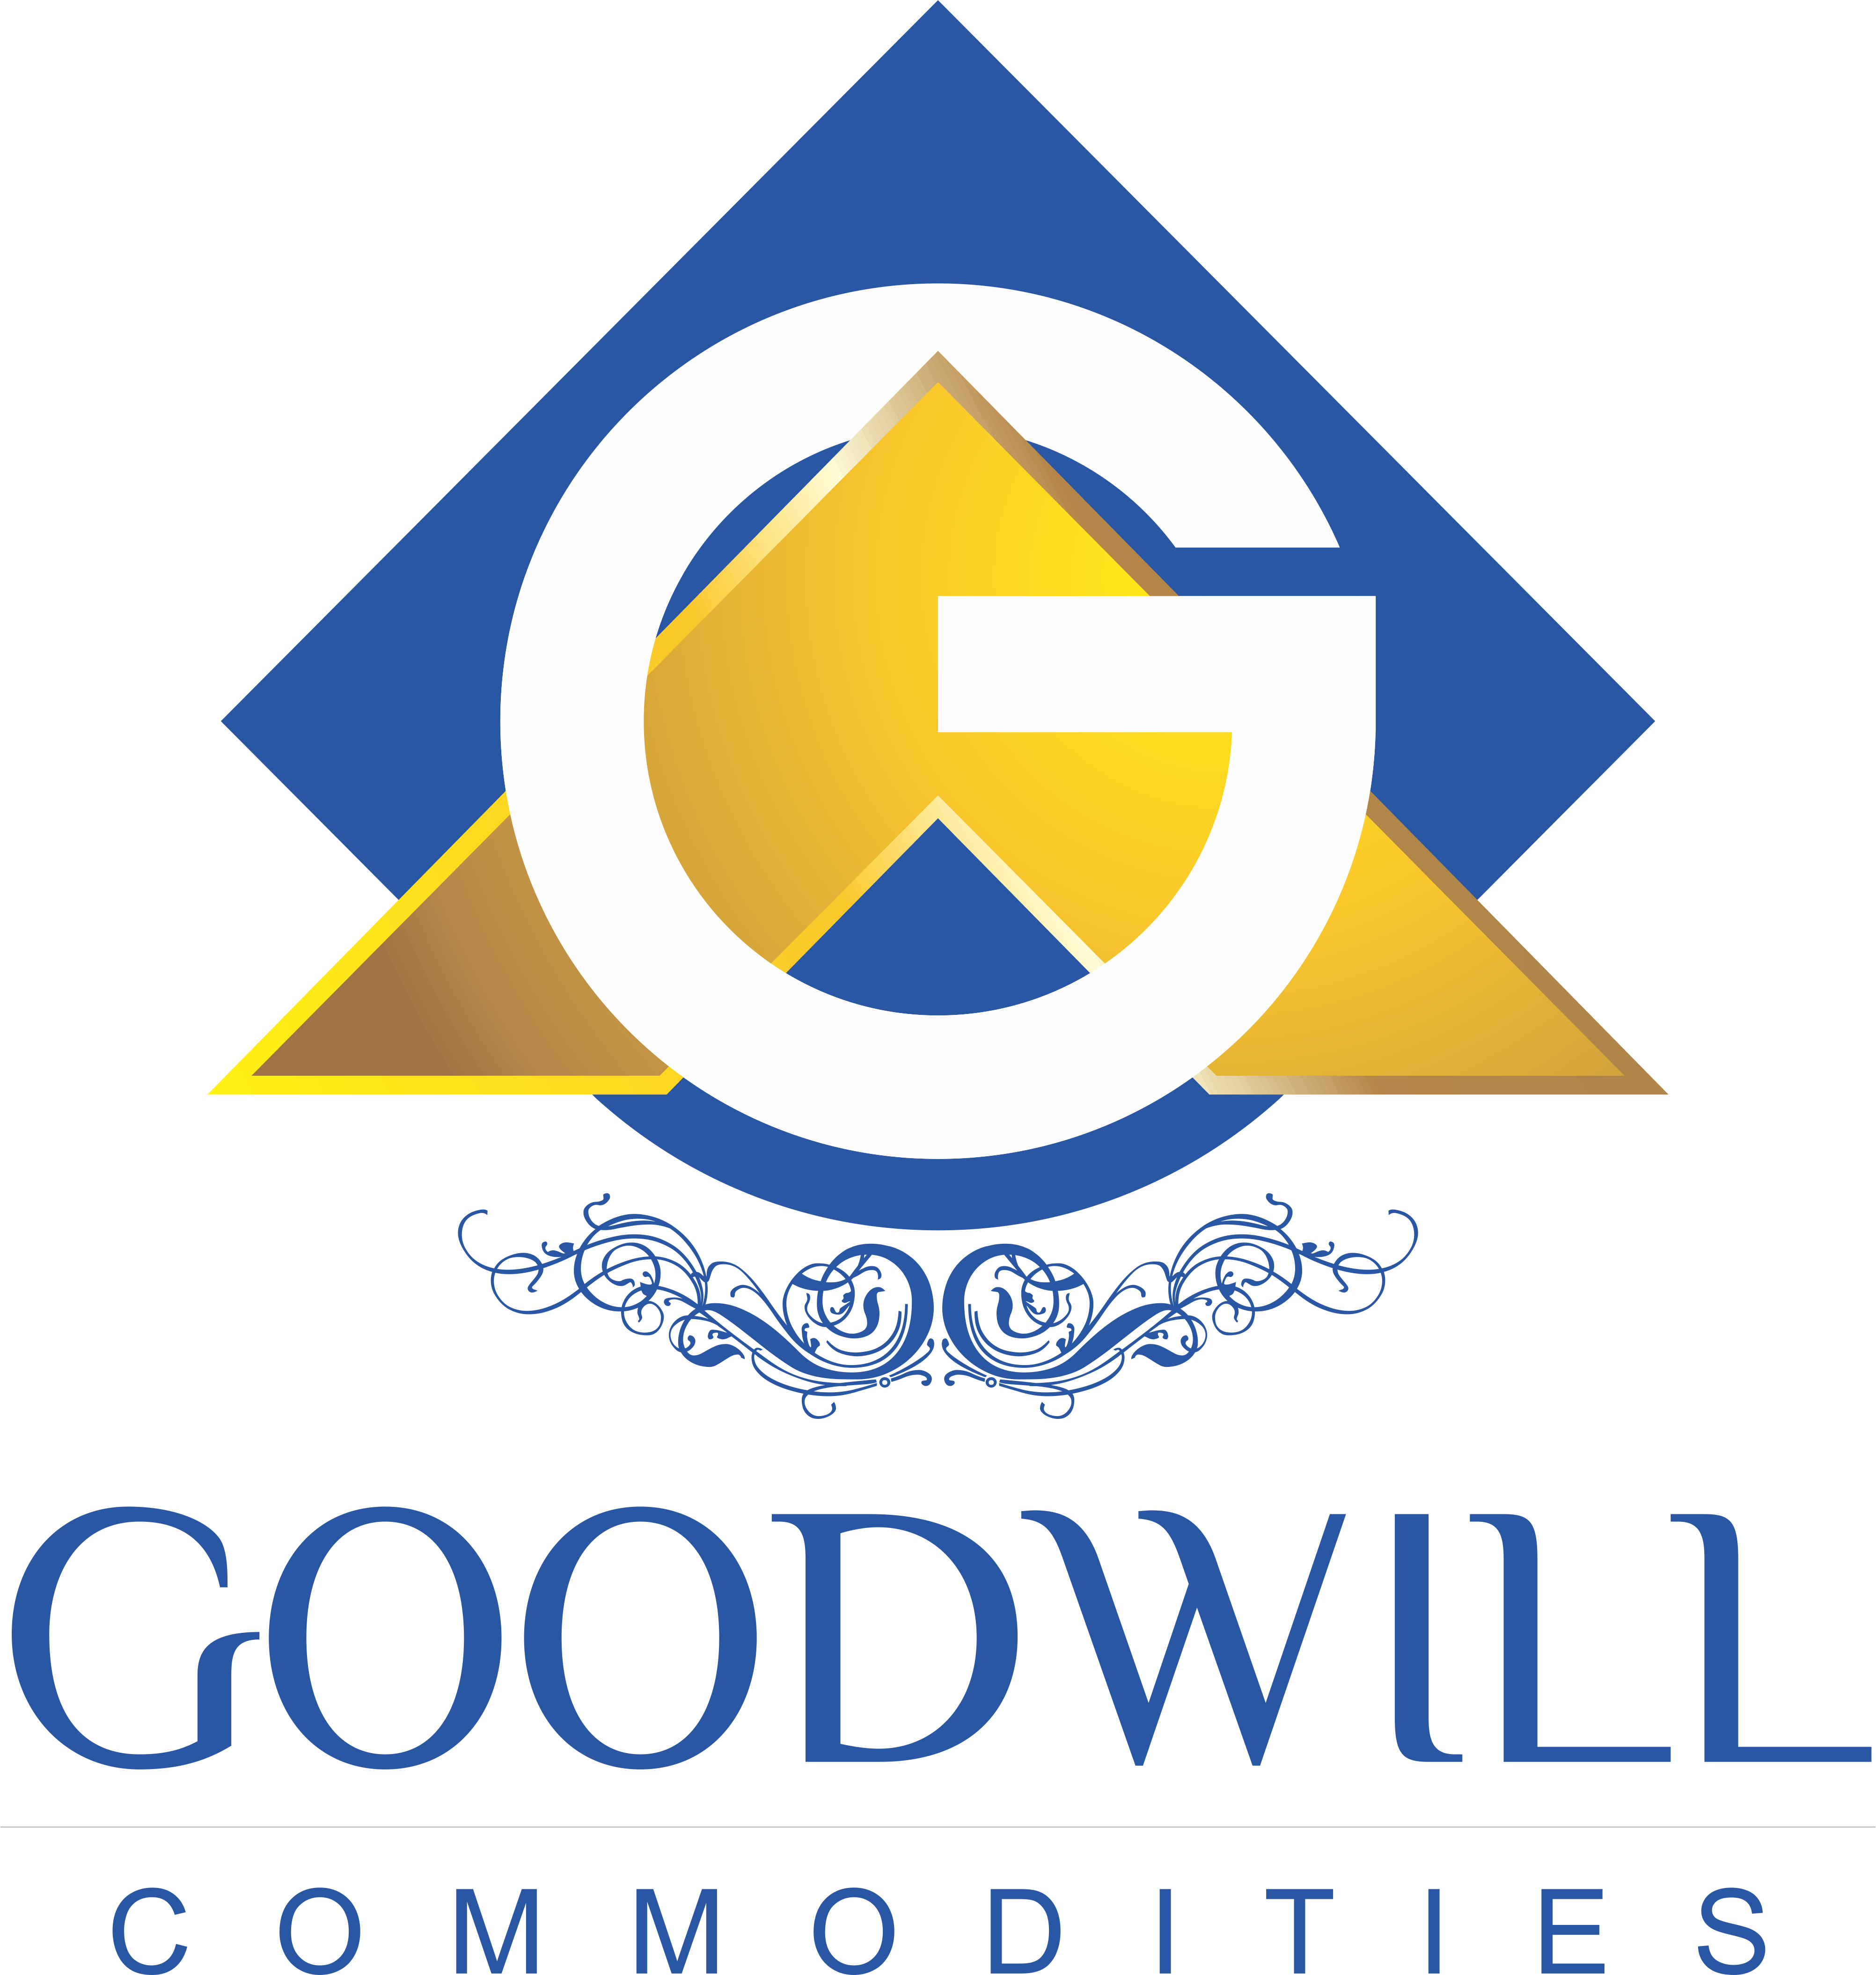 Goodwill Logo - Goodwill Commodities Competitors, Revenue and Employees - Owler ...